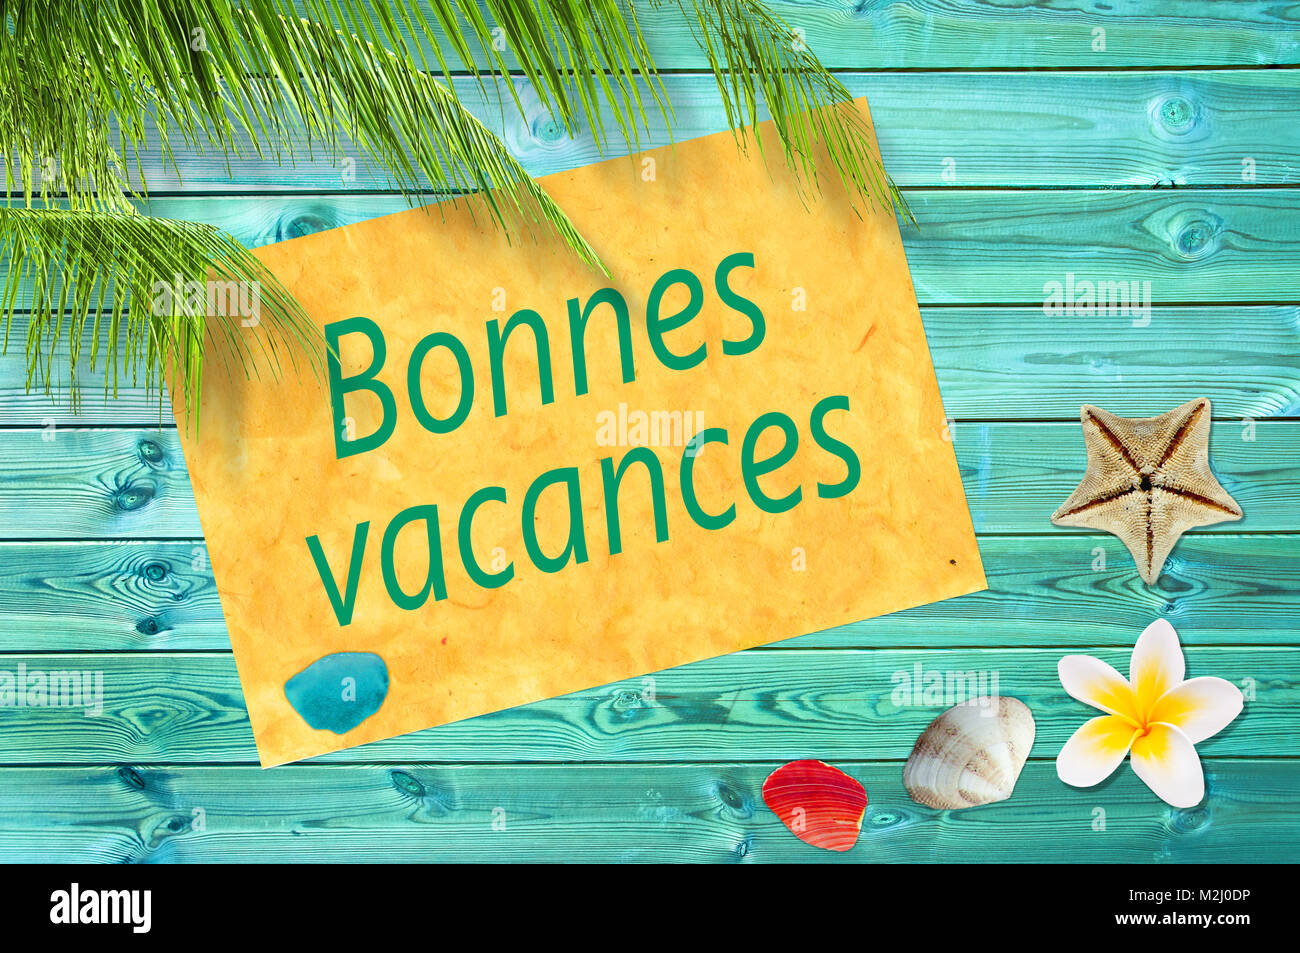 Bonnes vacances (meaning happy summer) written on a paper on colorful wood background with palm trees and sea shells Stock Photo